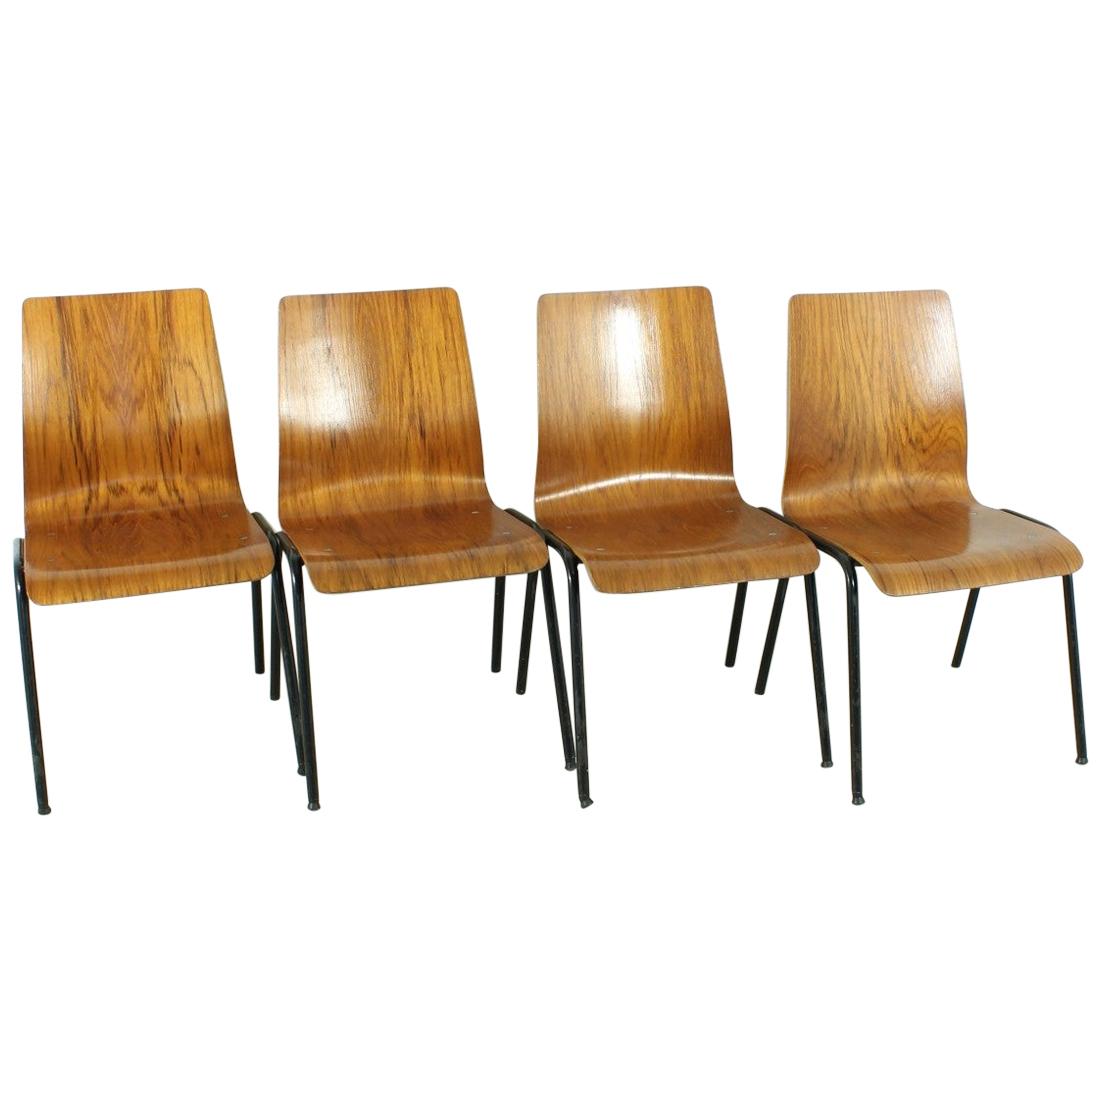 Set of 4 1960s Teak Chairs For Sale